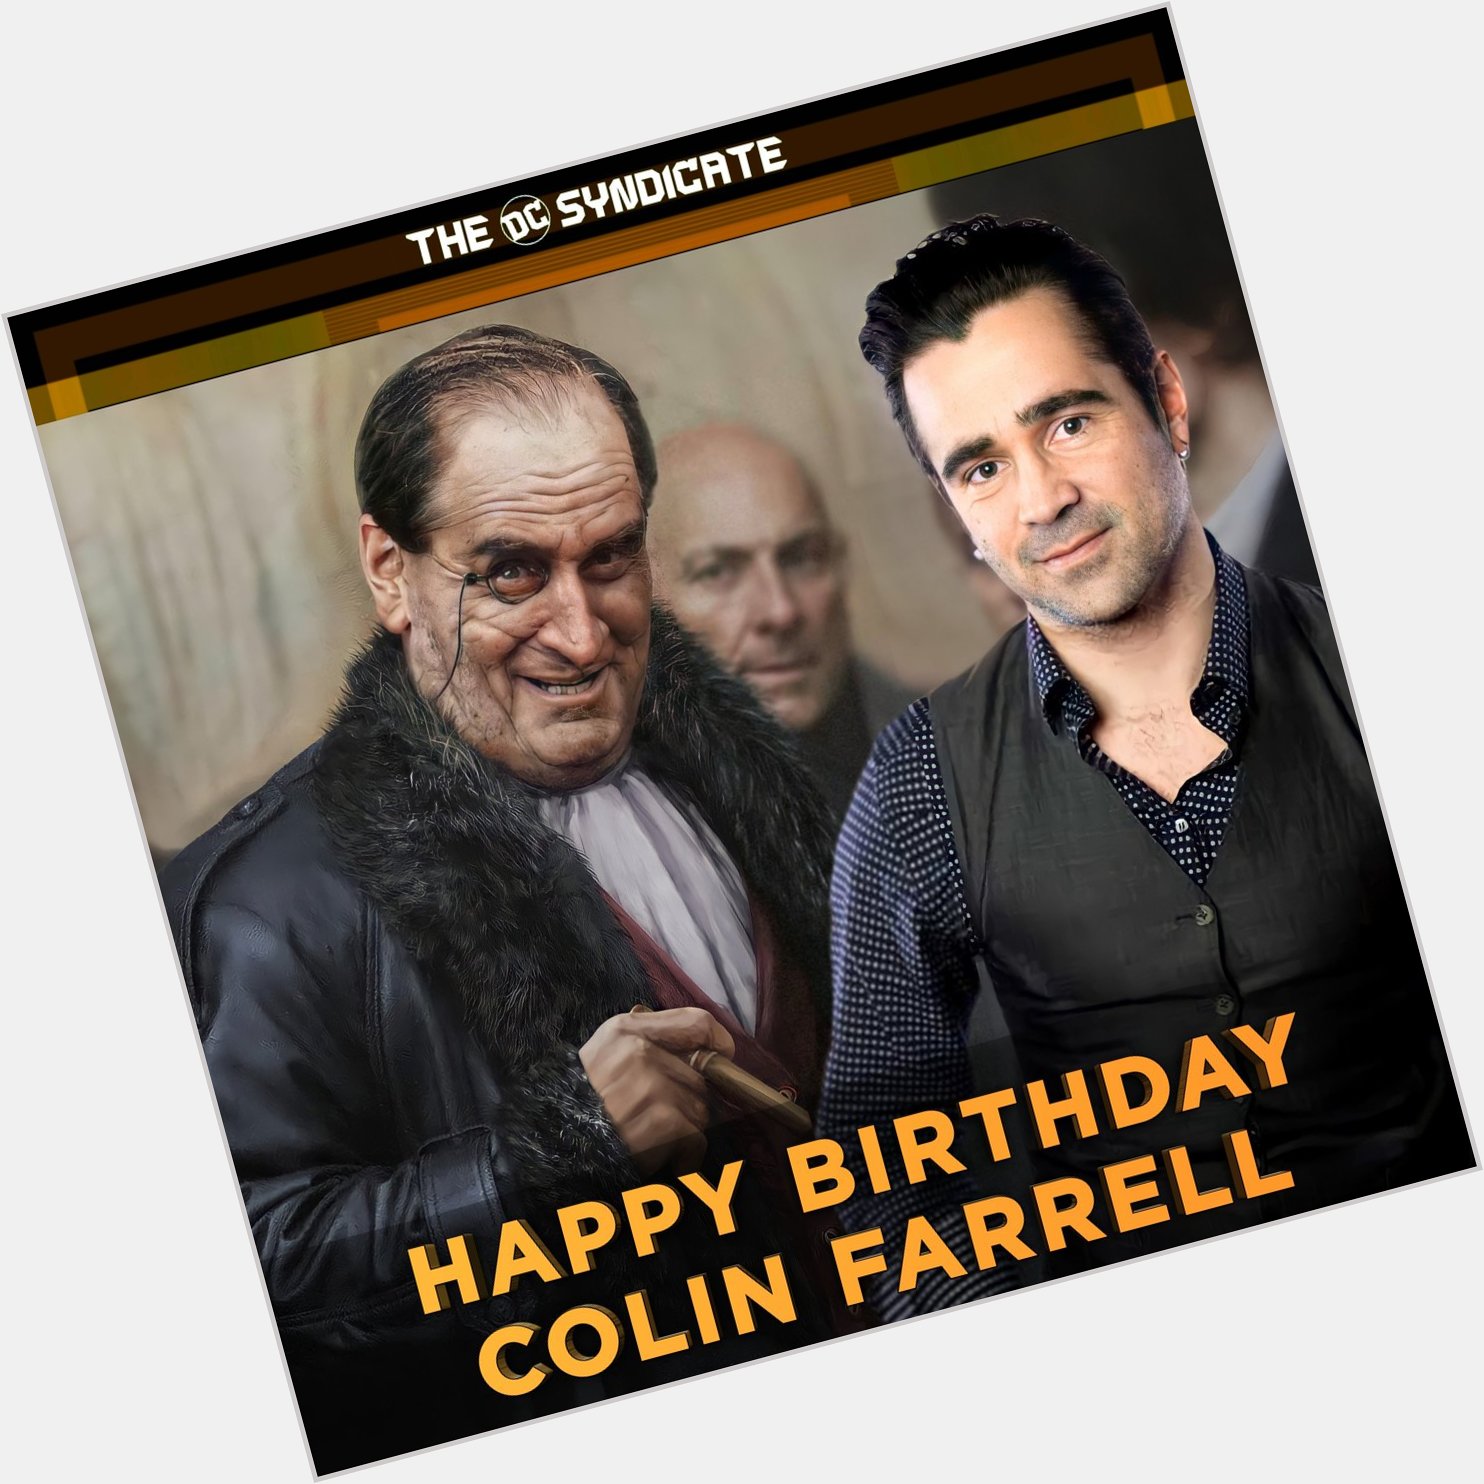 Happy Birthday COLIN FARRELL He portrays the role of PENGUIN in his upcoming Movie 